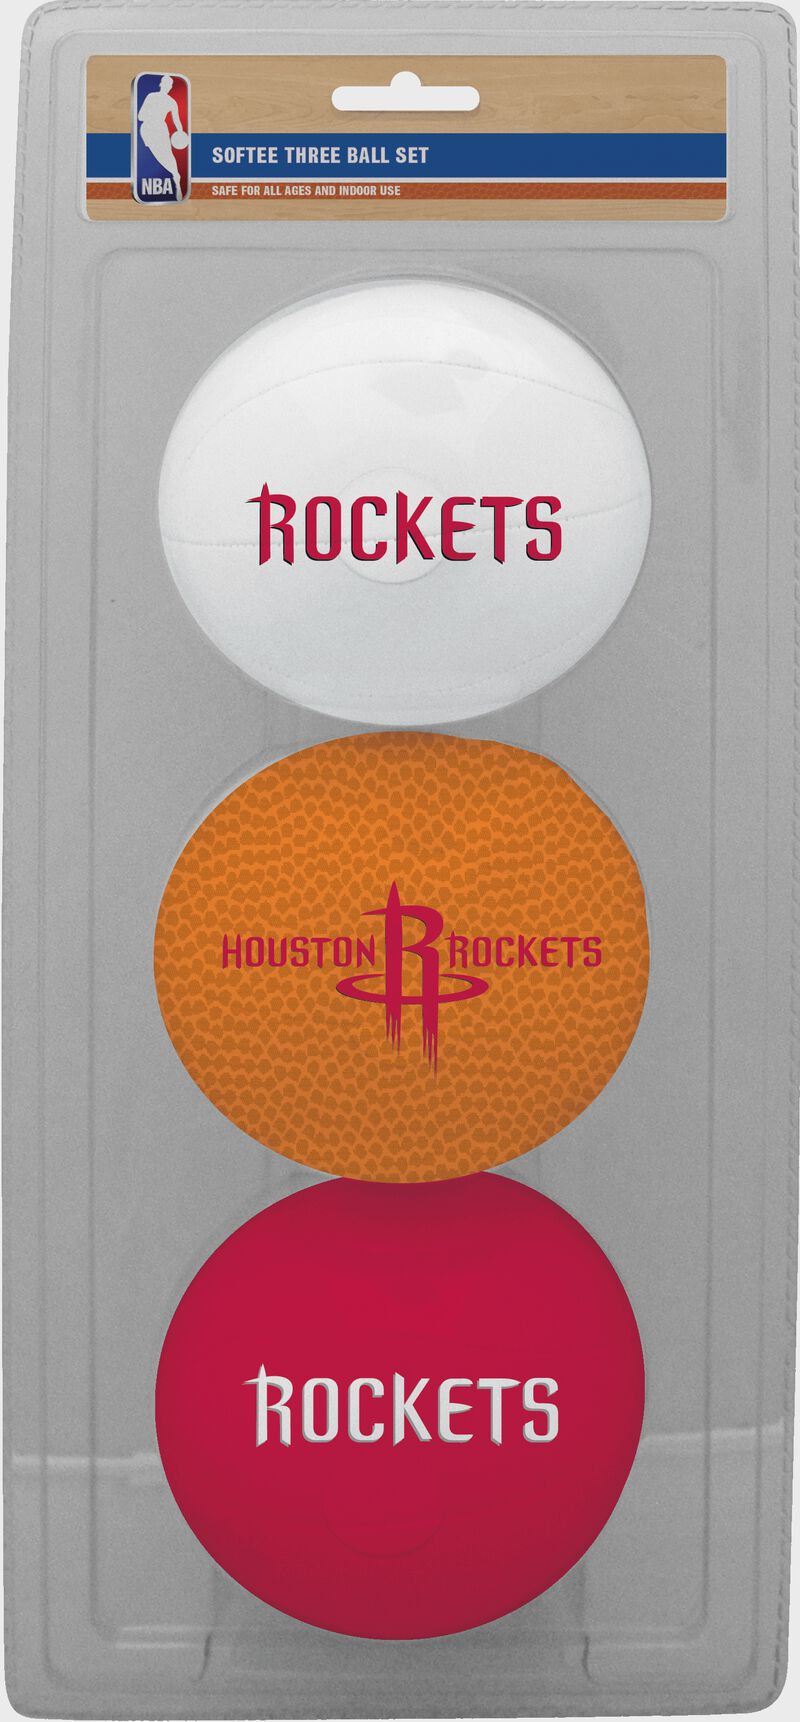 Rawlings White, Brown, and Red NBA Houston Rockets Three-Point Softee Basketball Set With Team Logo SKU #03524209114 loading=